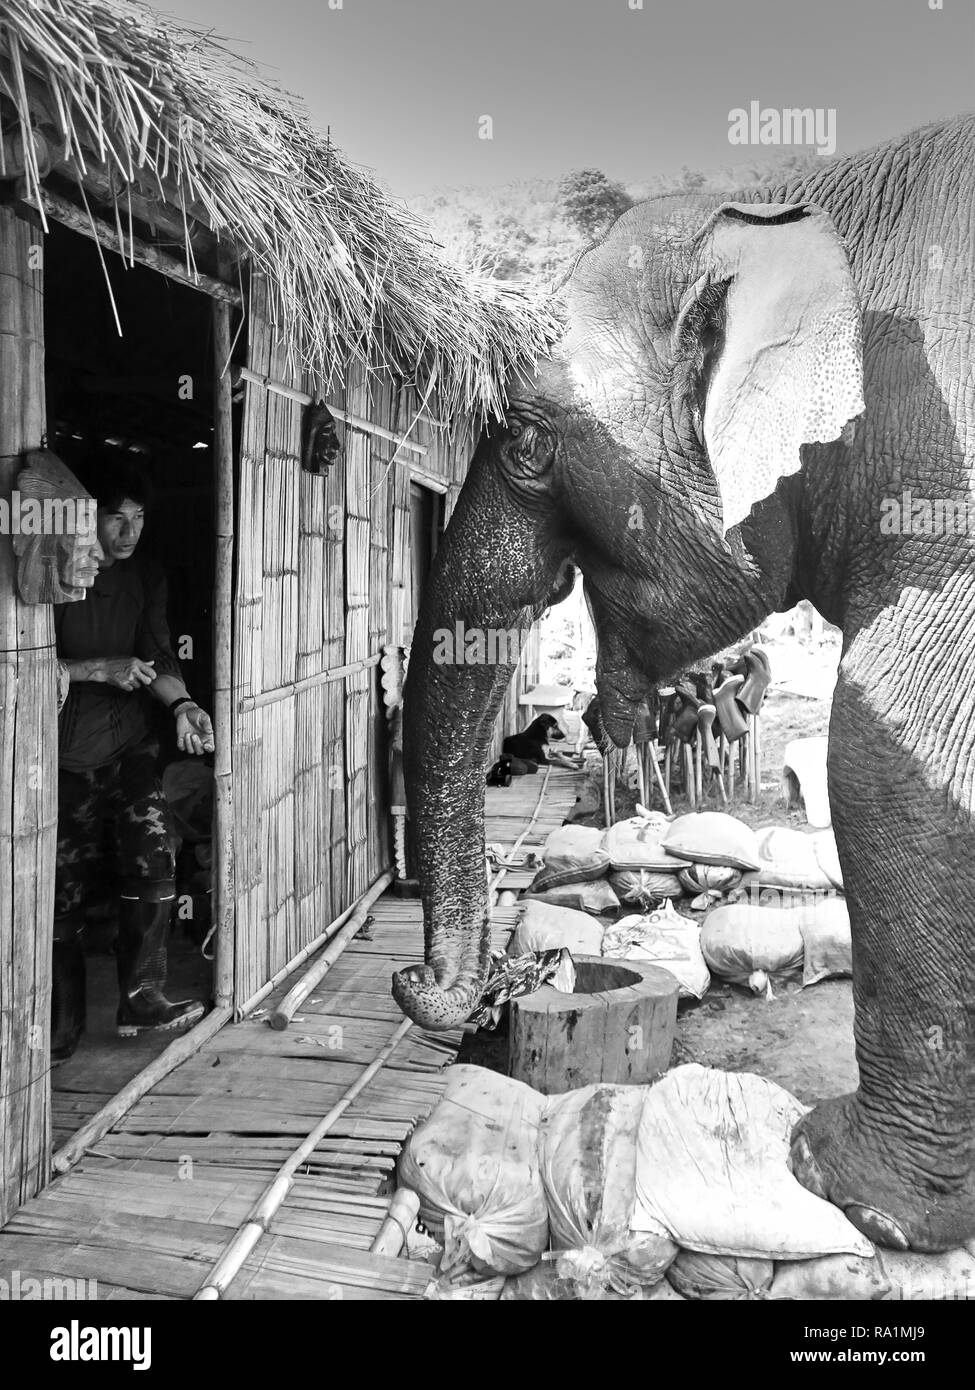 Two Asiatic Elephants in a thailandese village Stock Photo